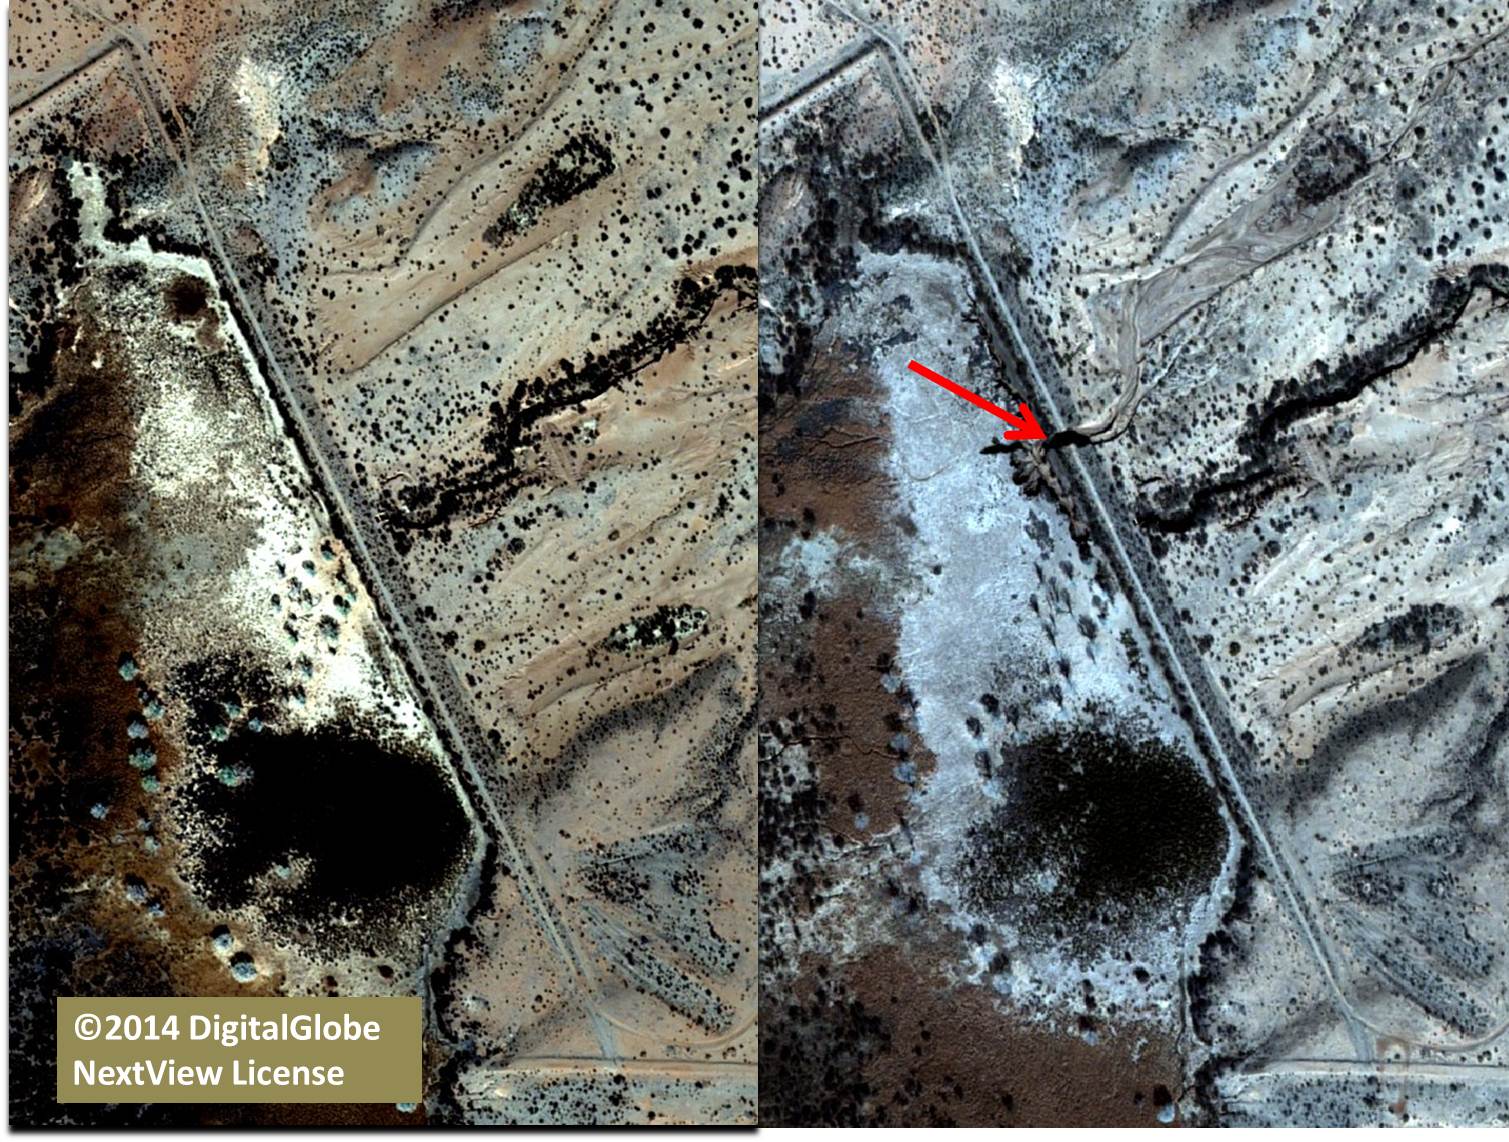 WorldView-2 high-resolution multispectral imagery collected before (left) and after (right) the HX Dam failure. The red arrow identifies the dam breach. North is oriented toward the top of the image.